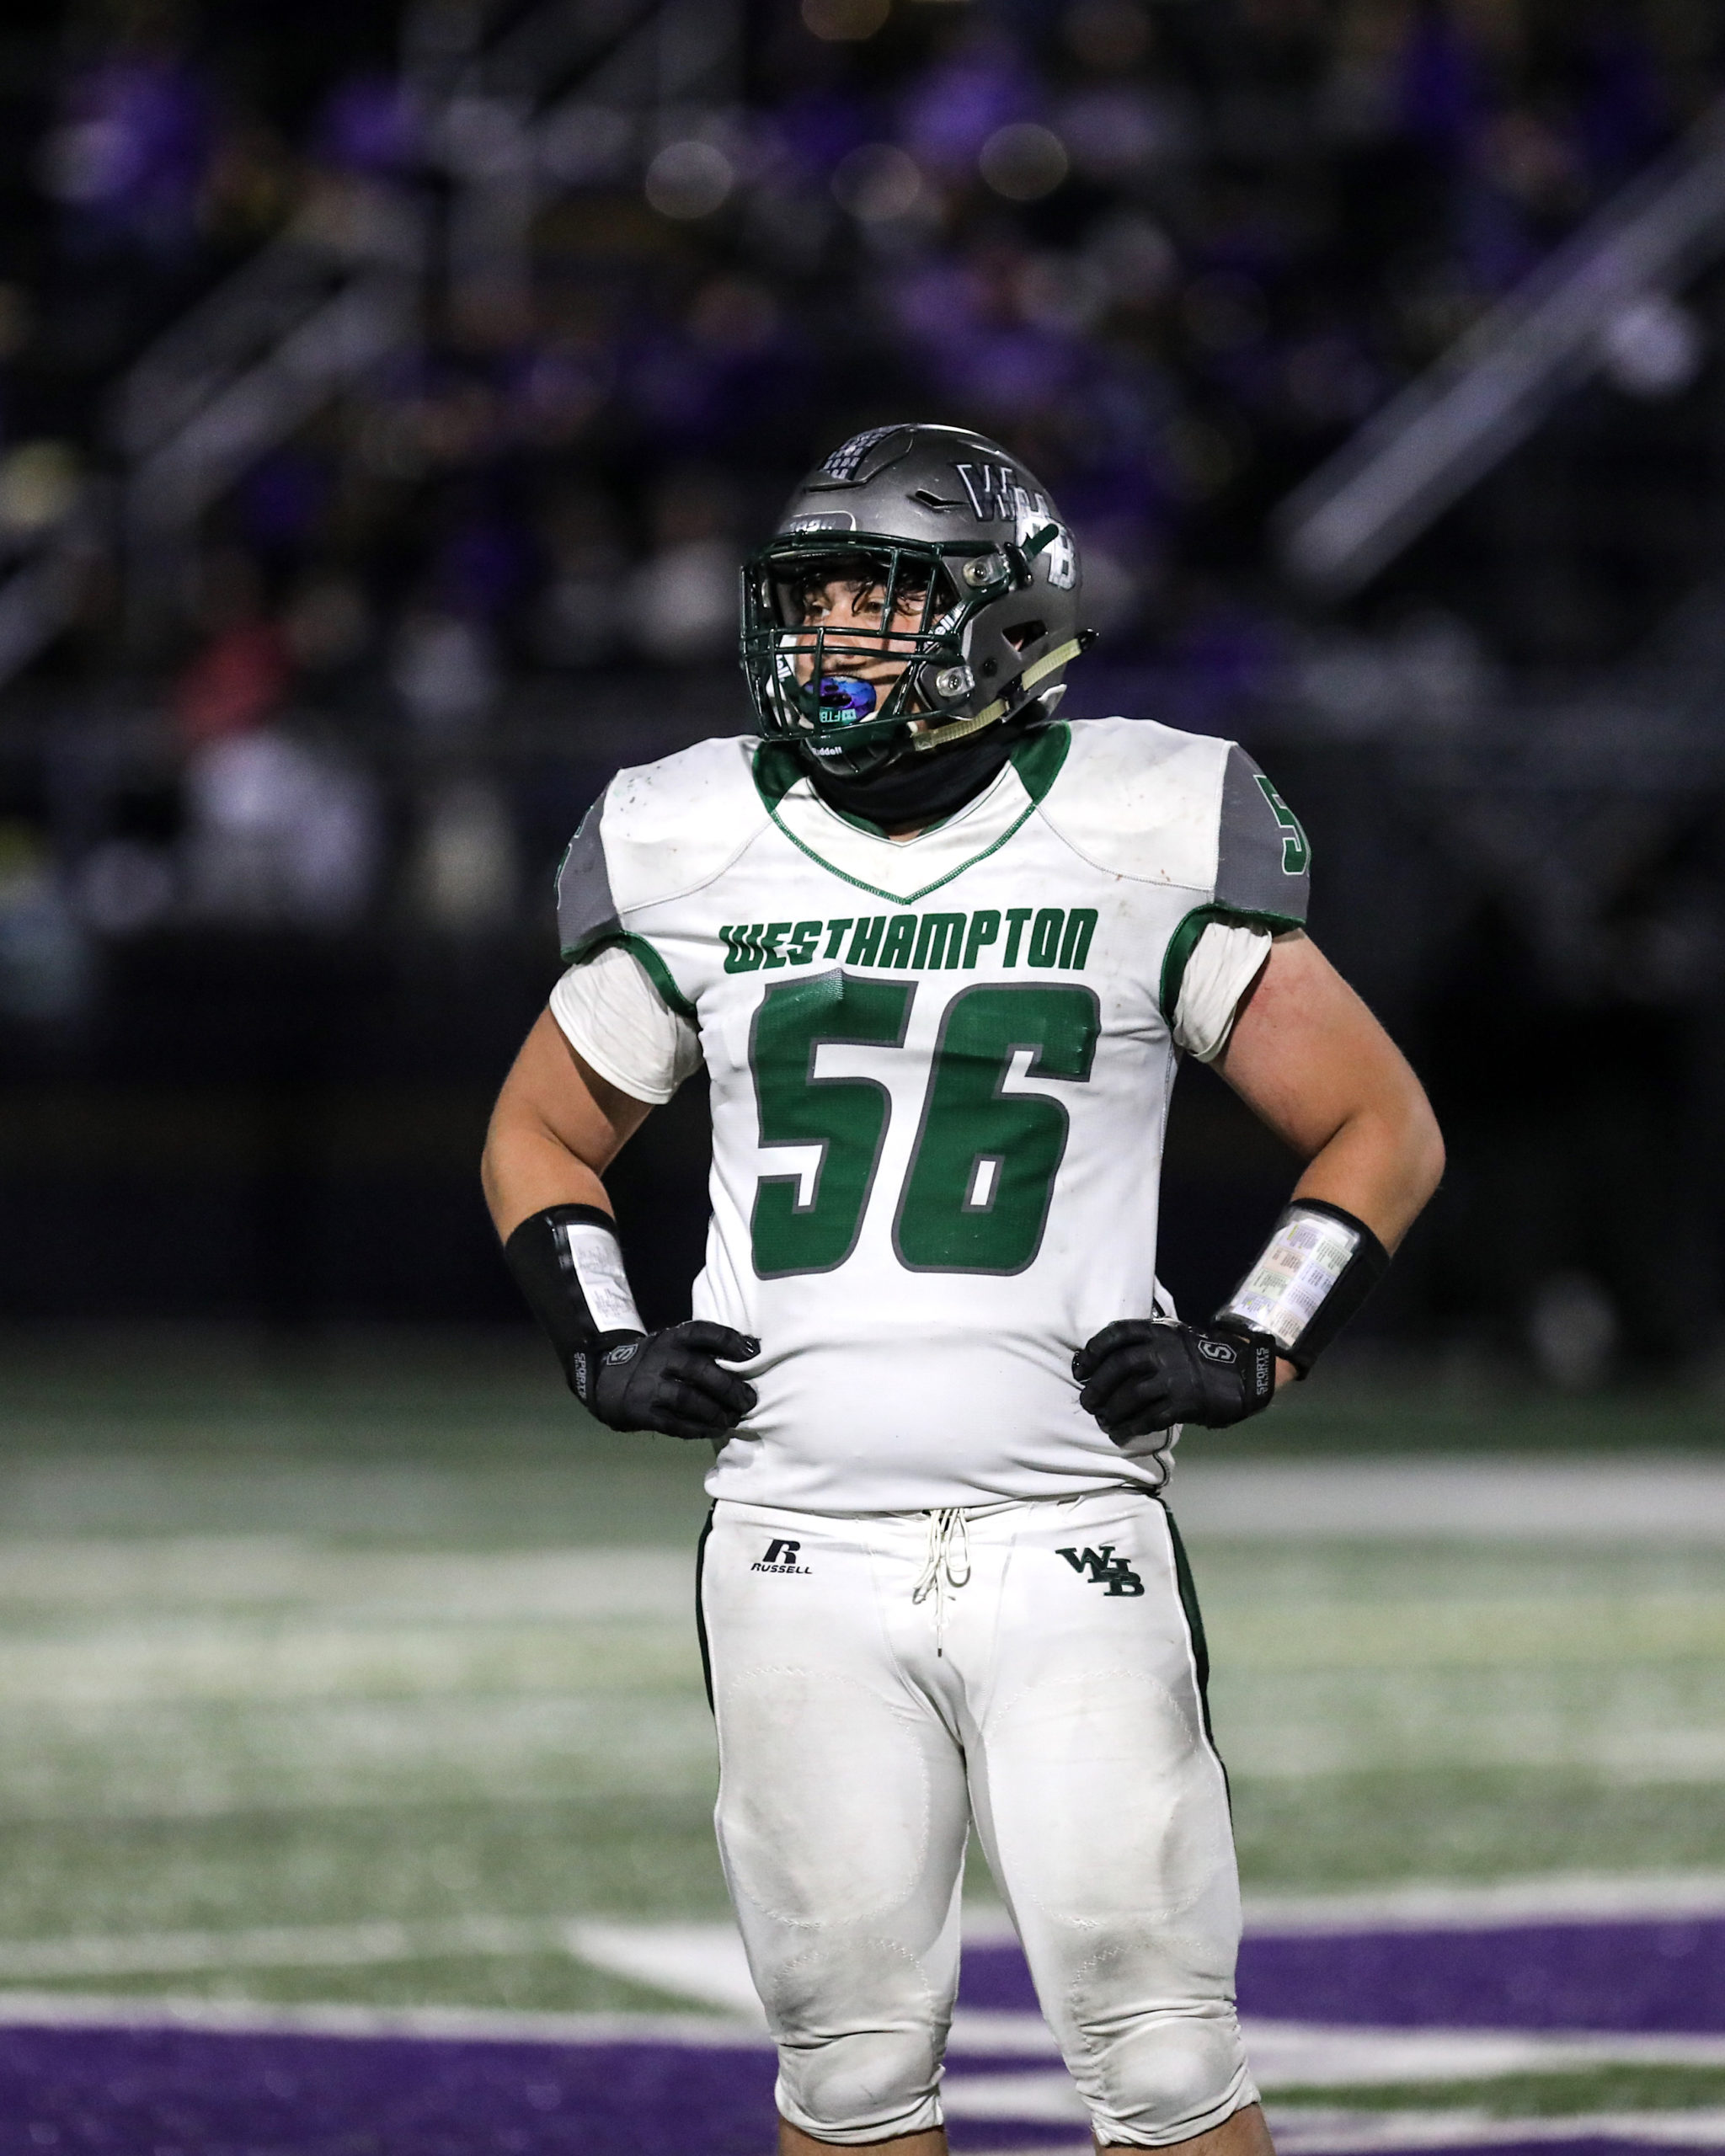 Westhampton Beach defensive end James Foster had a blocked extra-point kick in the loss to Sayville.